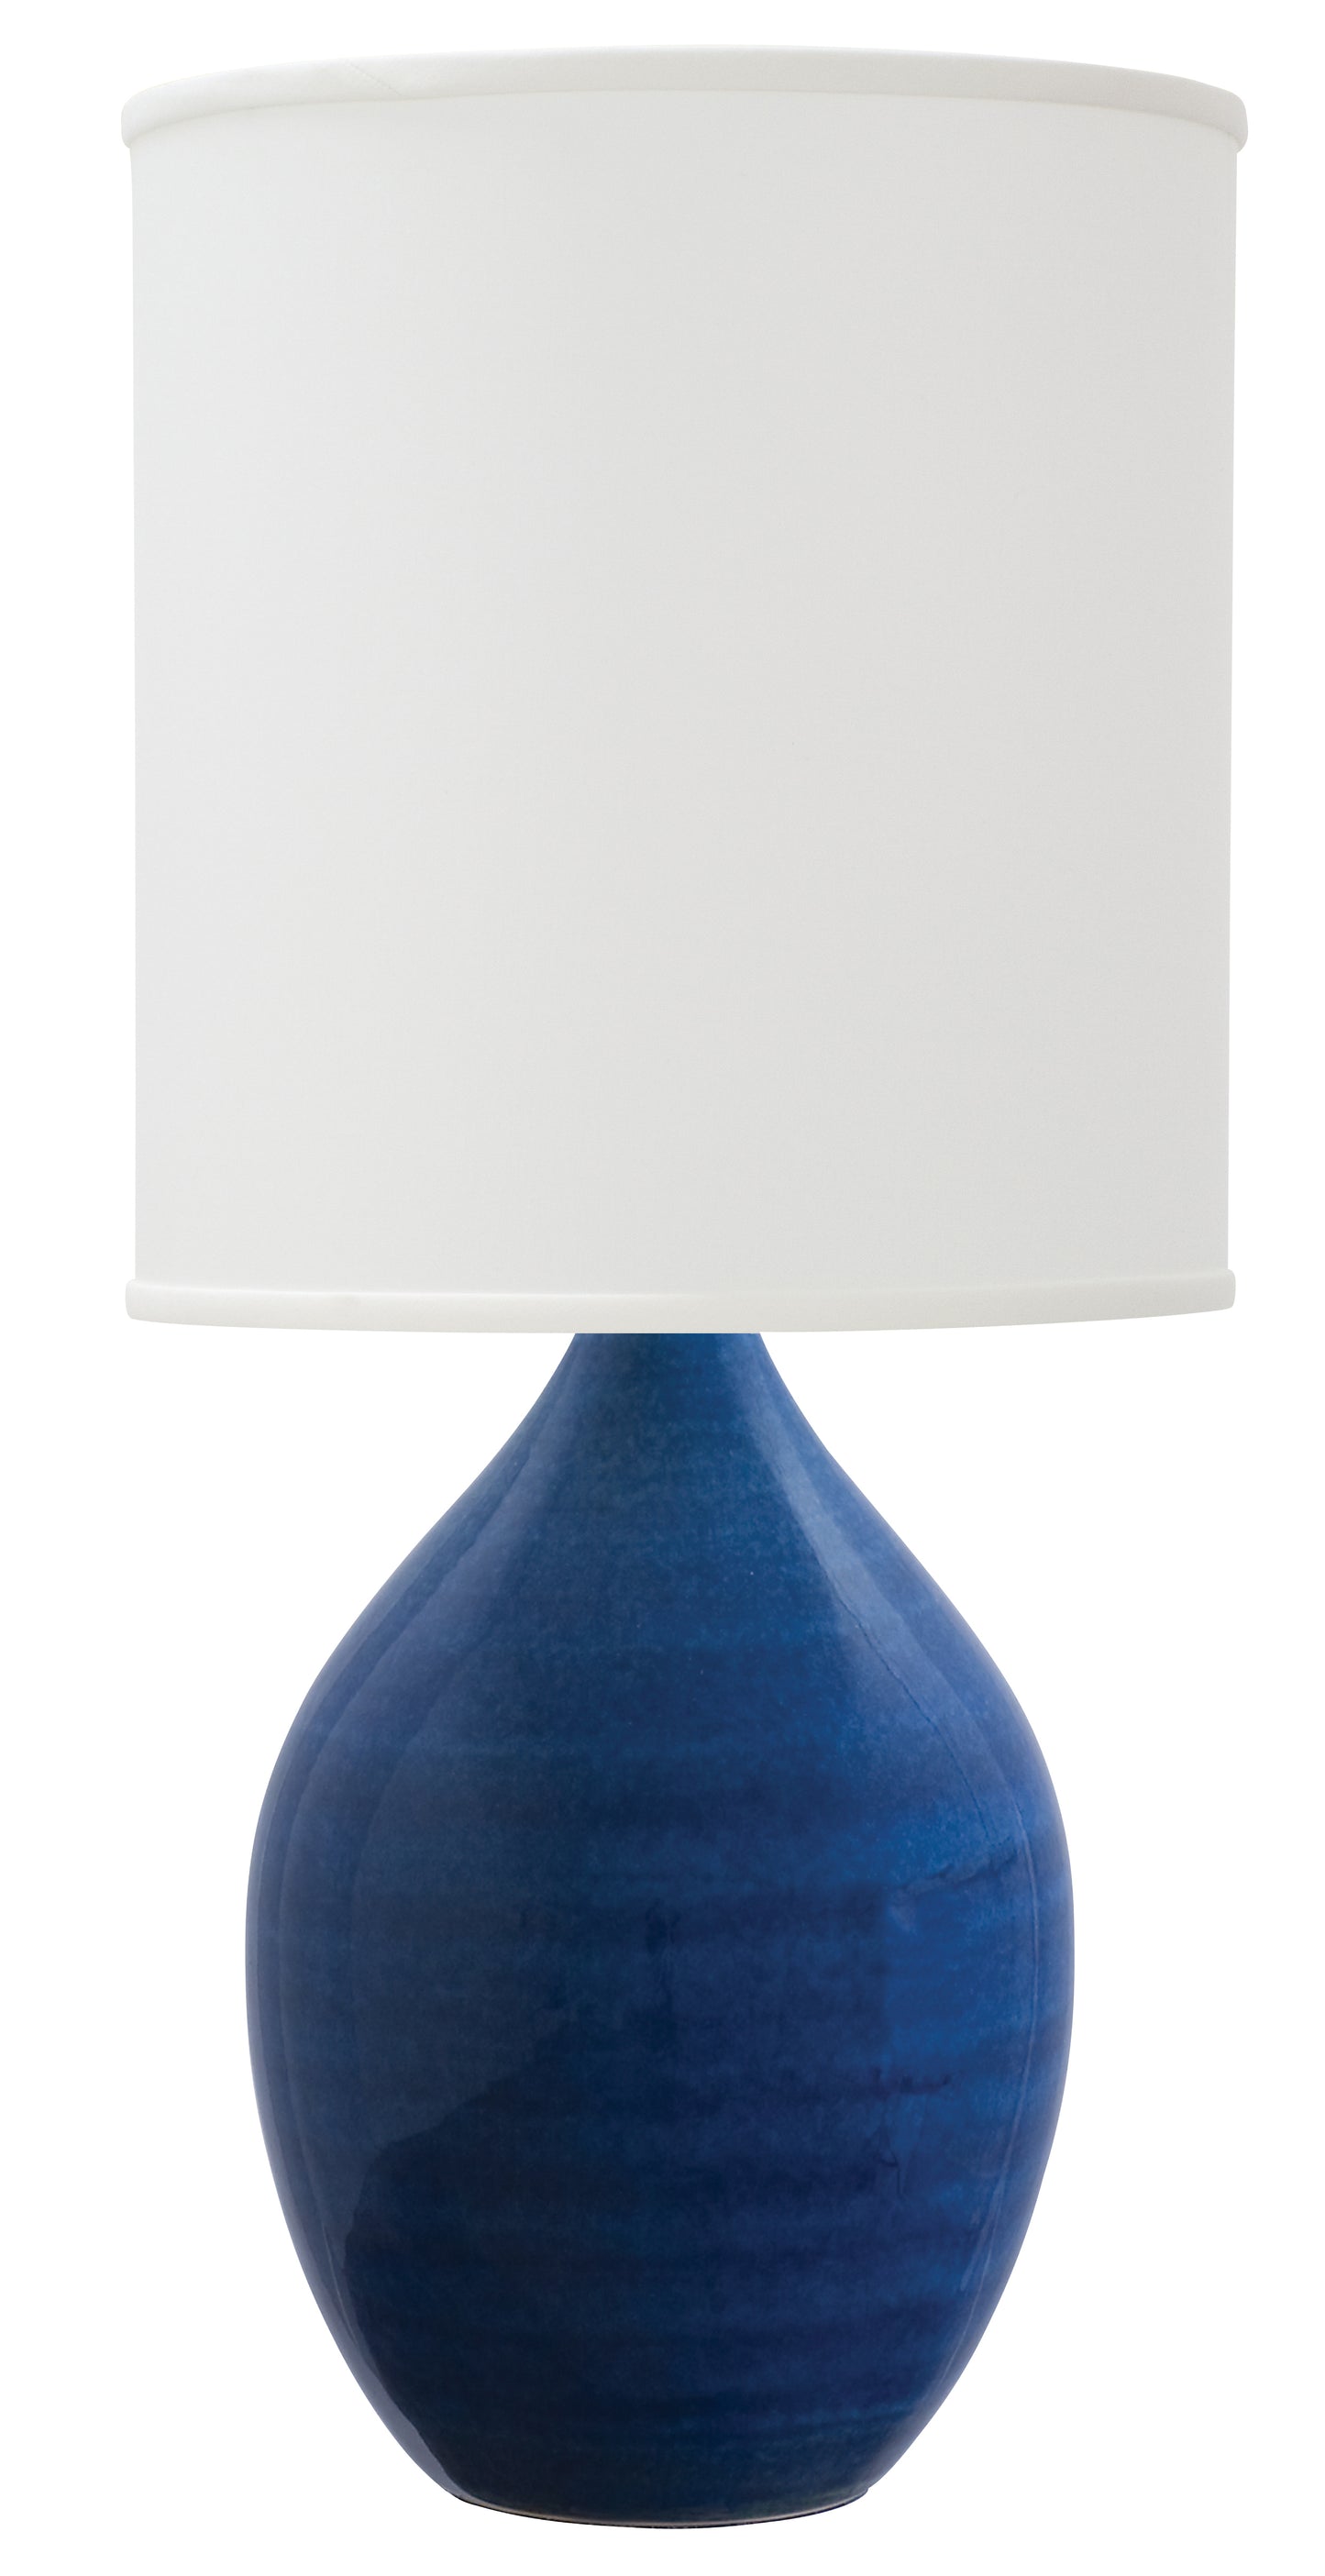 House of Troy Scatchard 24" Stoneware Table Lamp in Blue Gloss GS301-BG